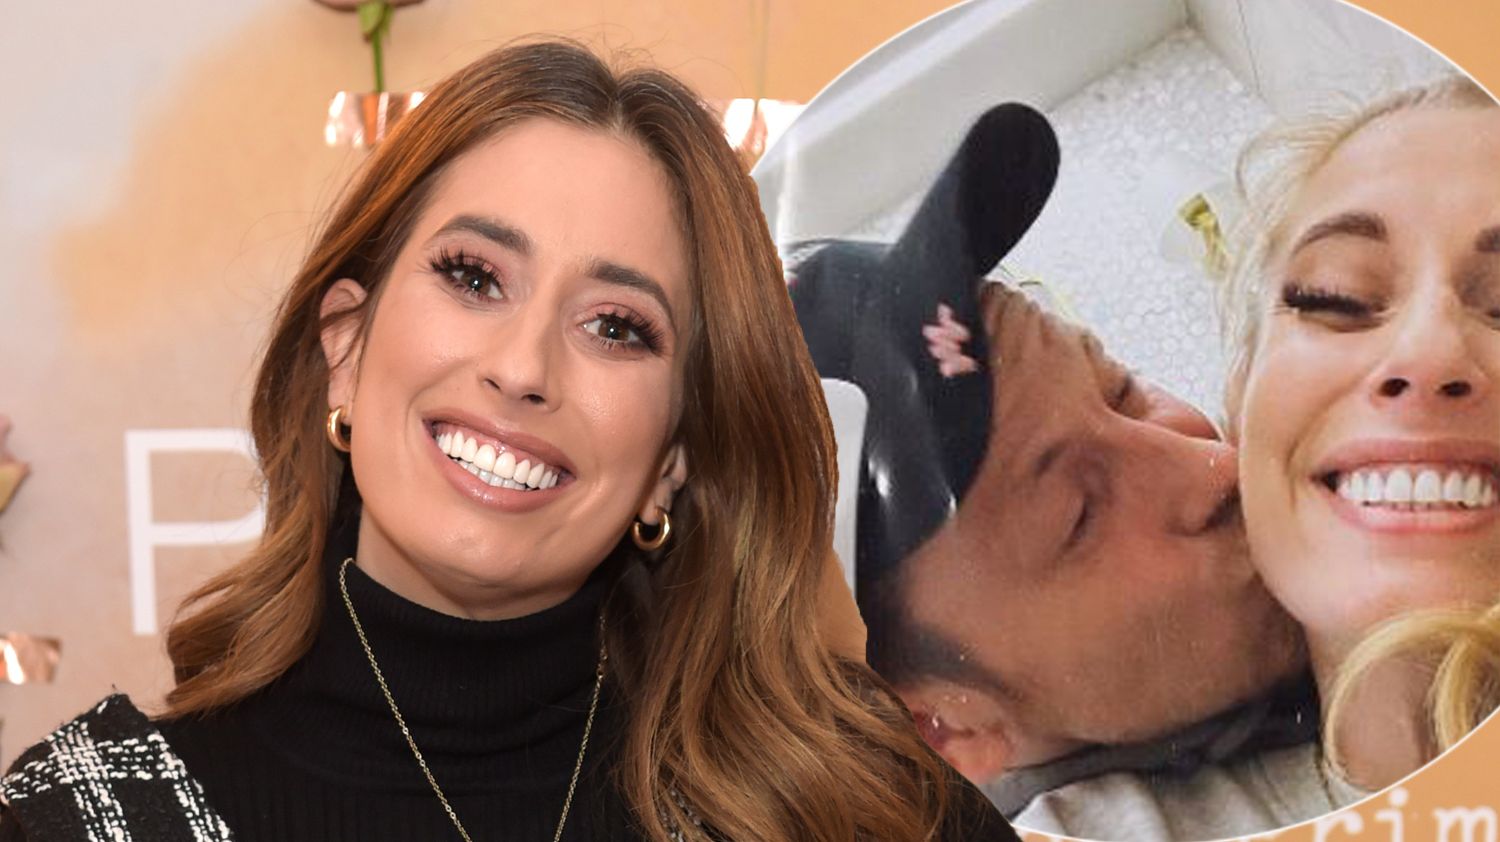 How many months pregnant is Stacey Solomon?